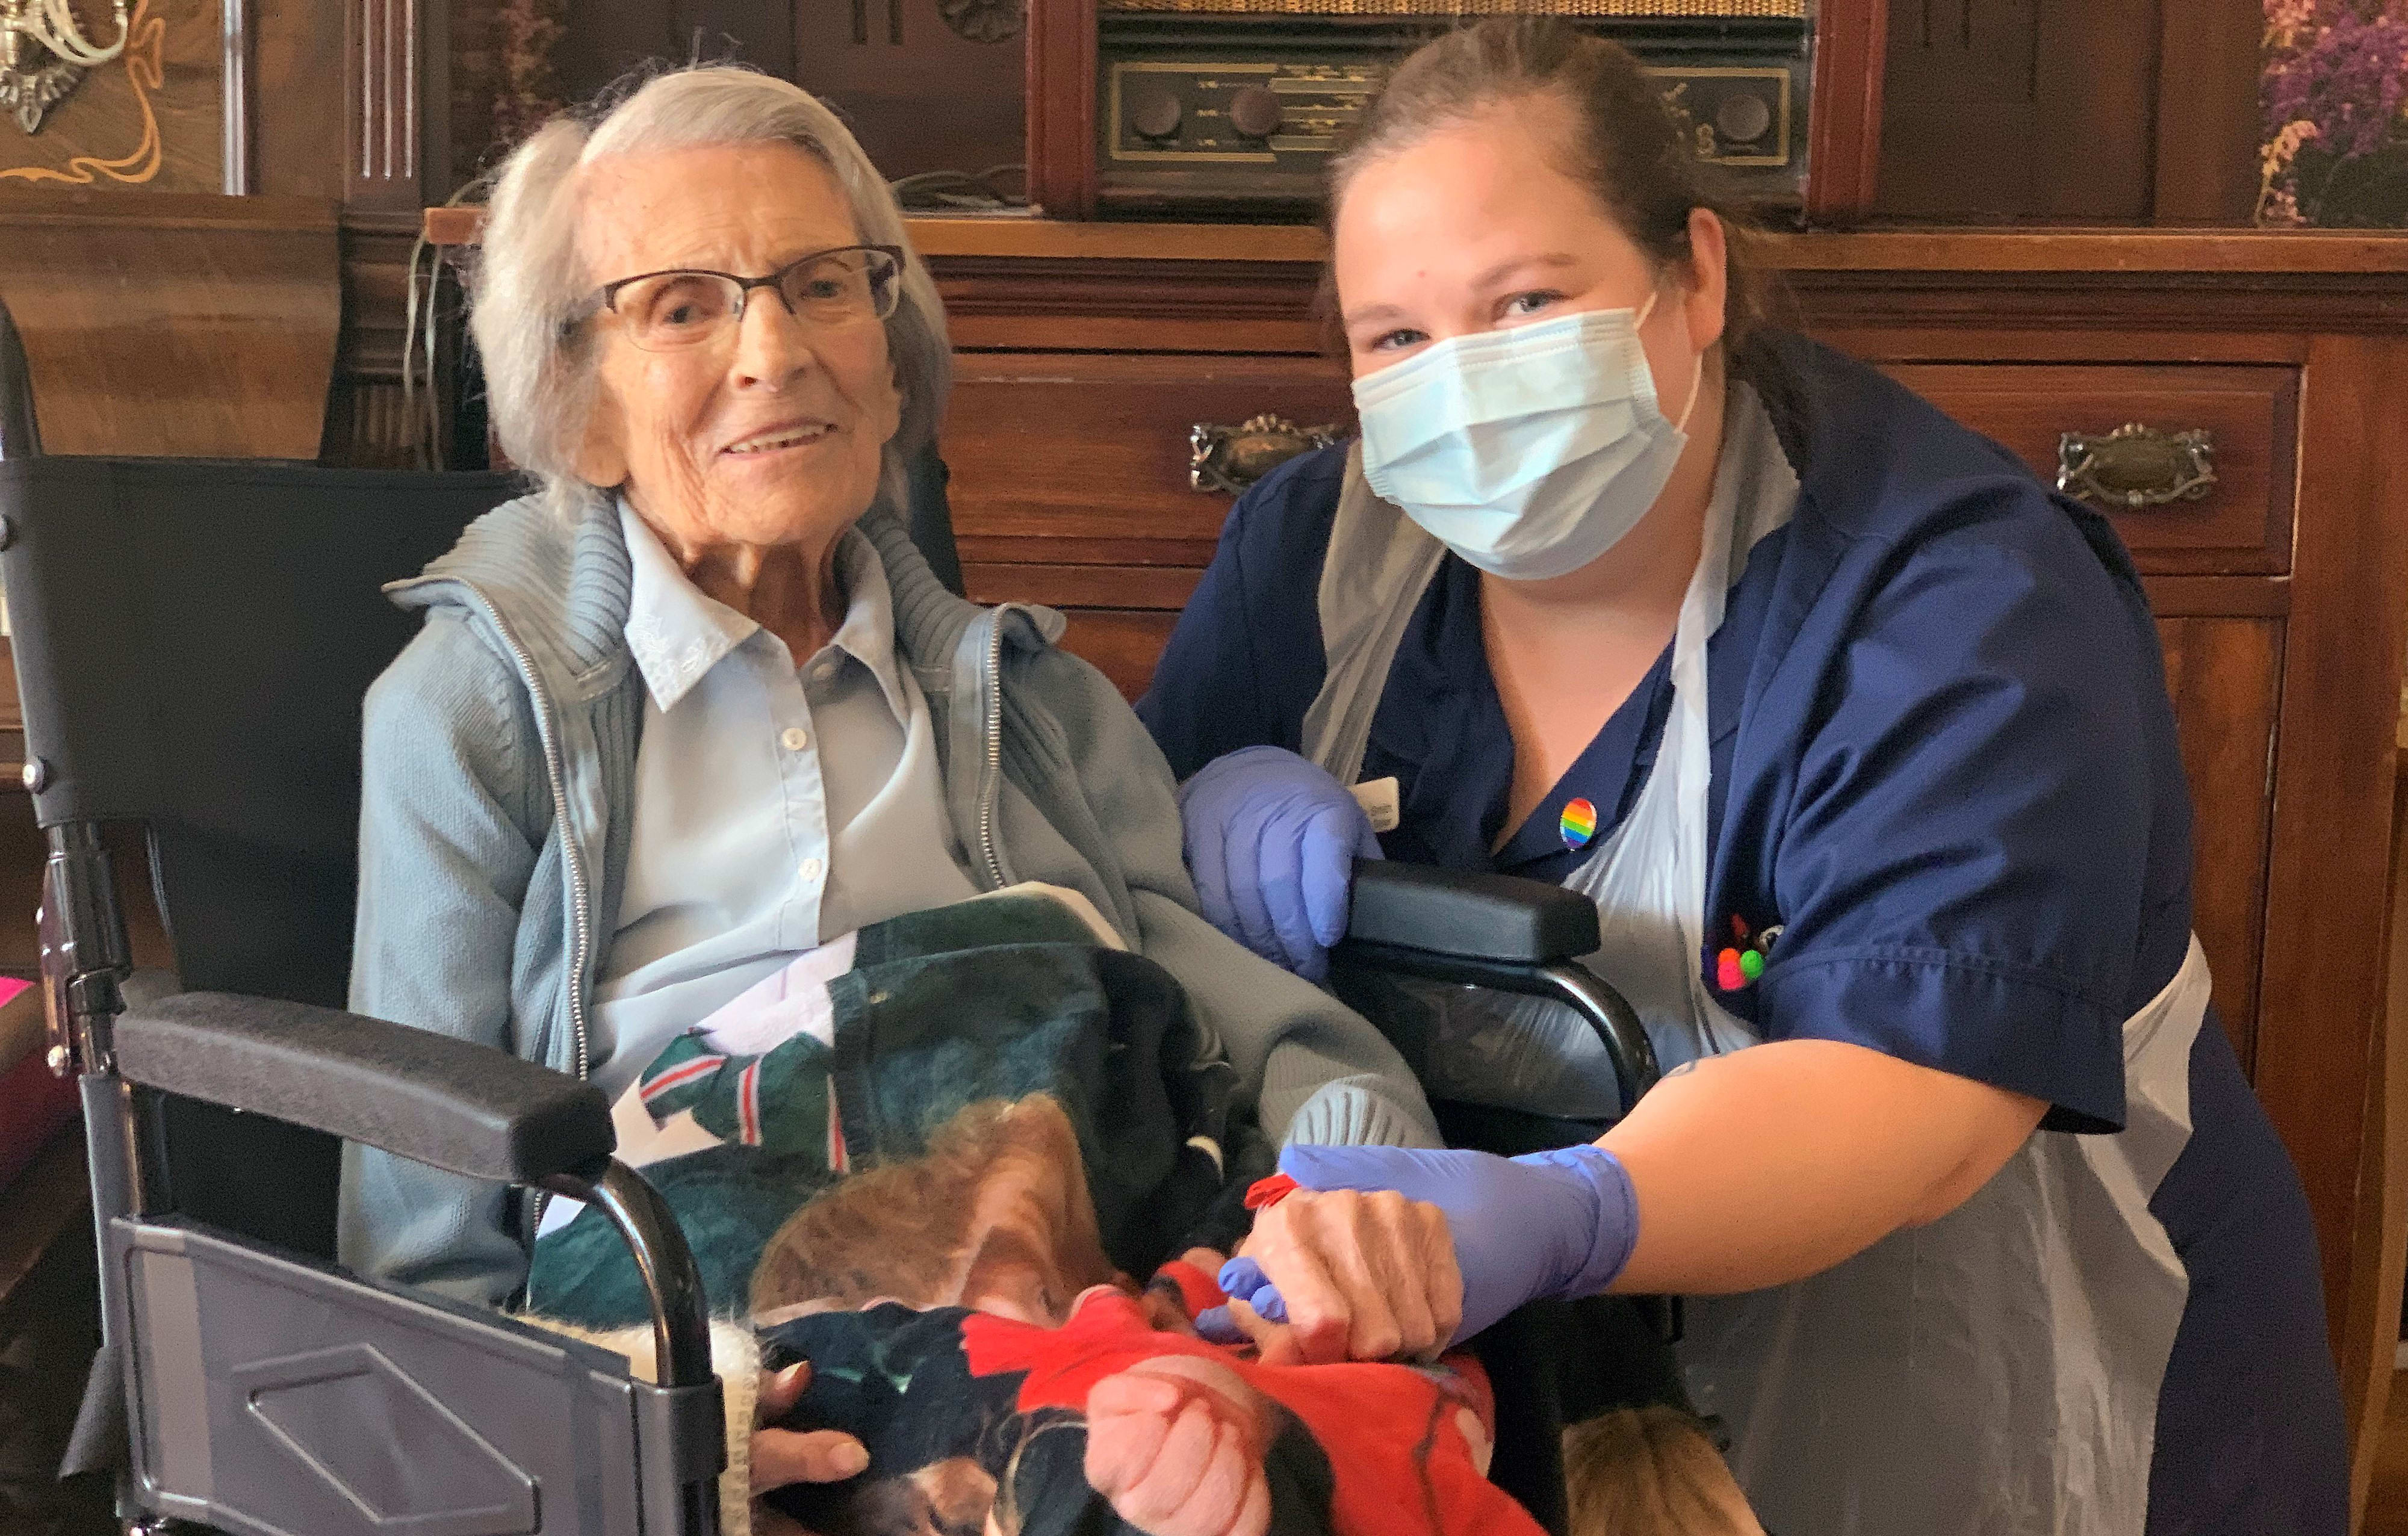 Recovered Covid-19 patient, 106-year-old Connie Titchen (left), with Sister Kelly Smith, posing for a photograph in Birmingham, central England.